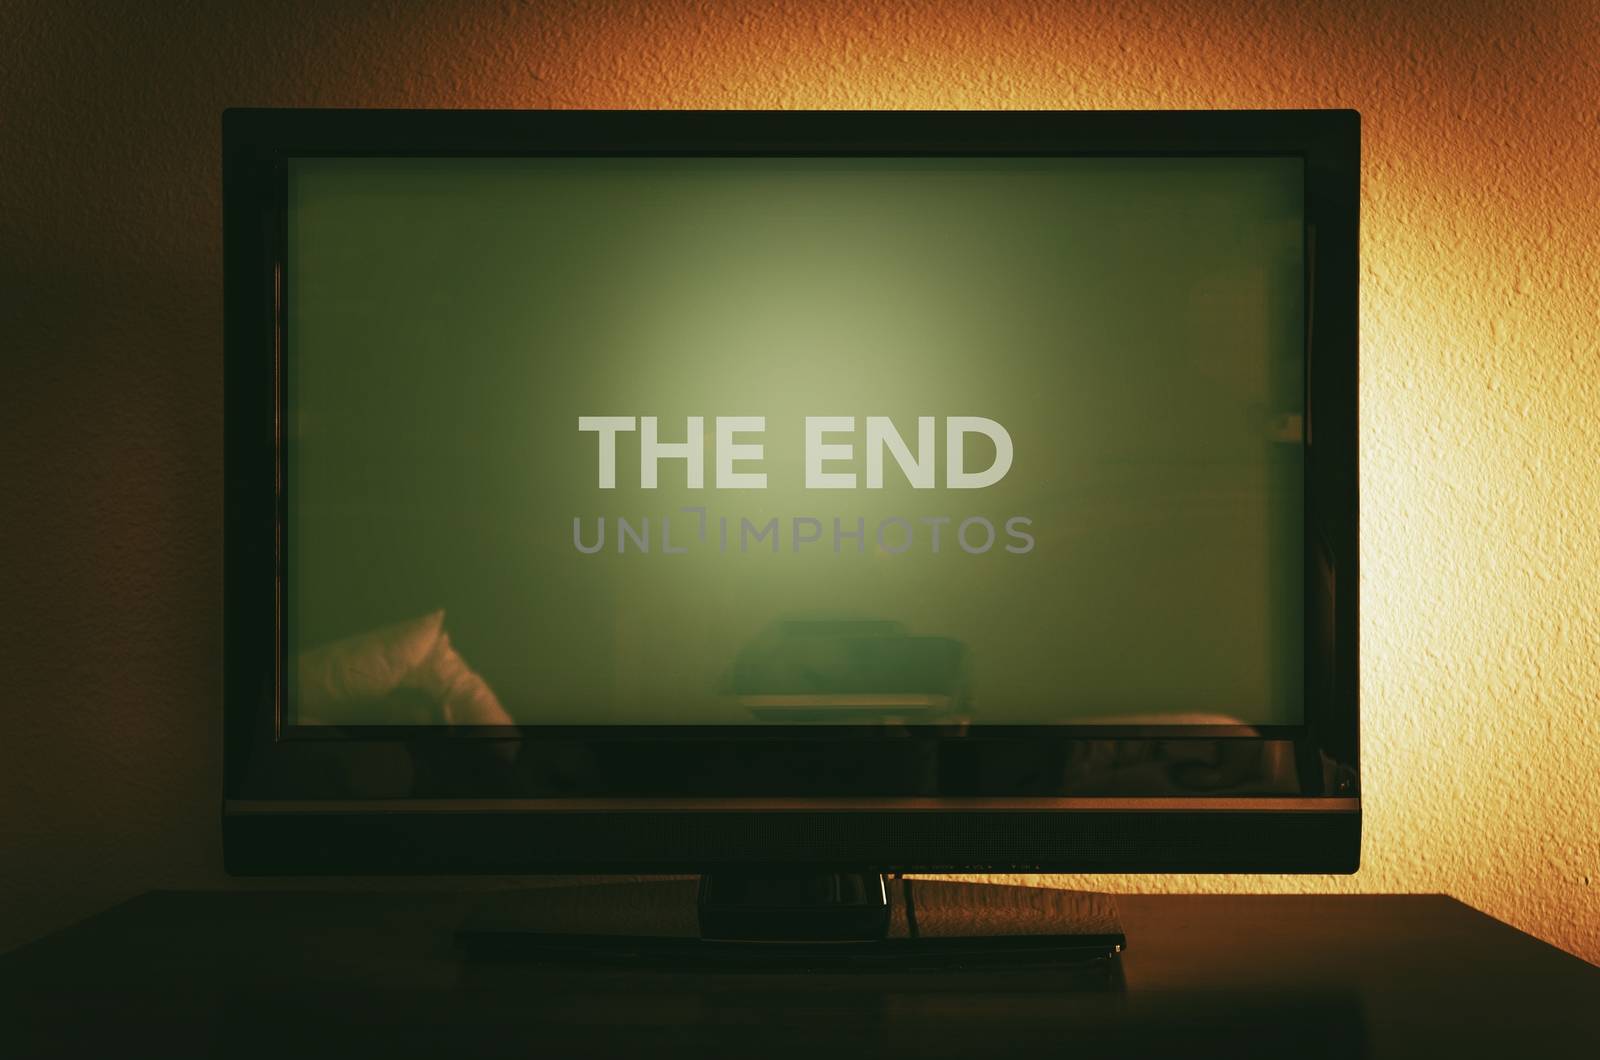 The End of Television by welcomia